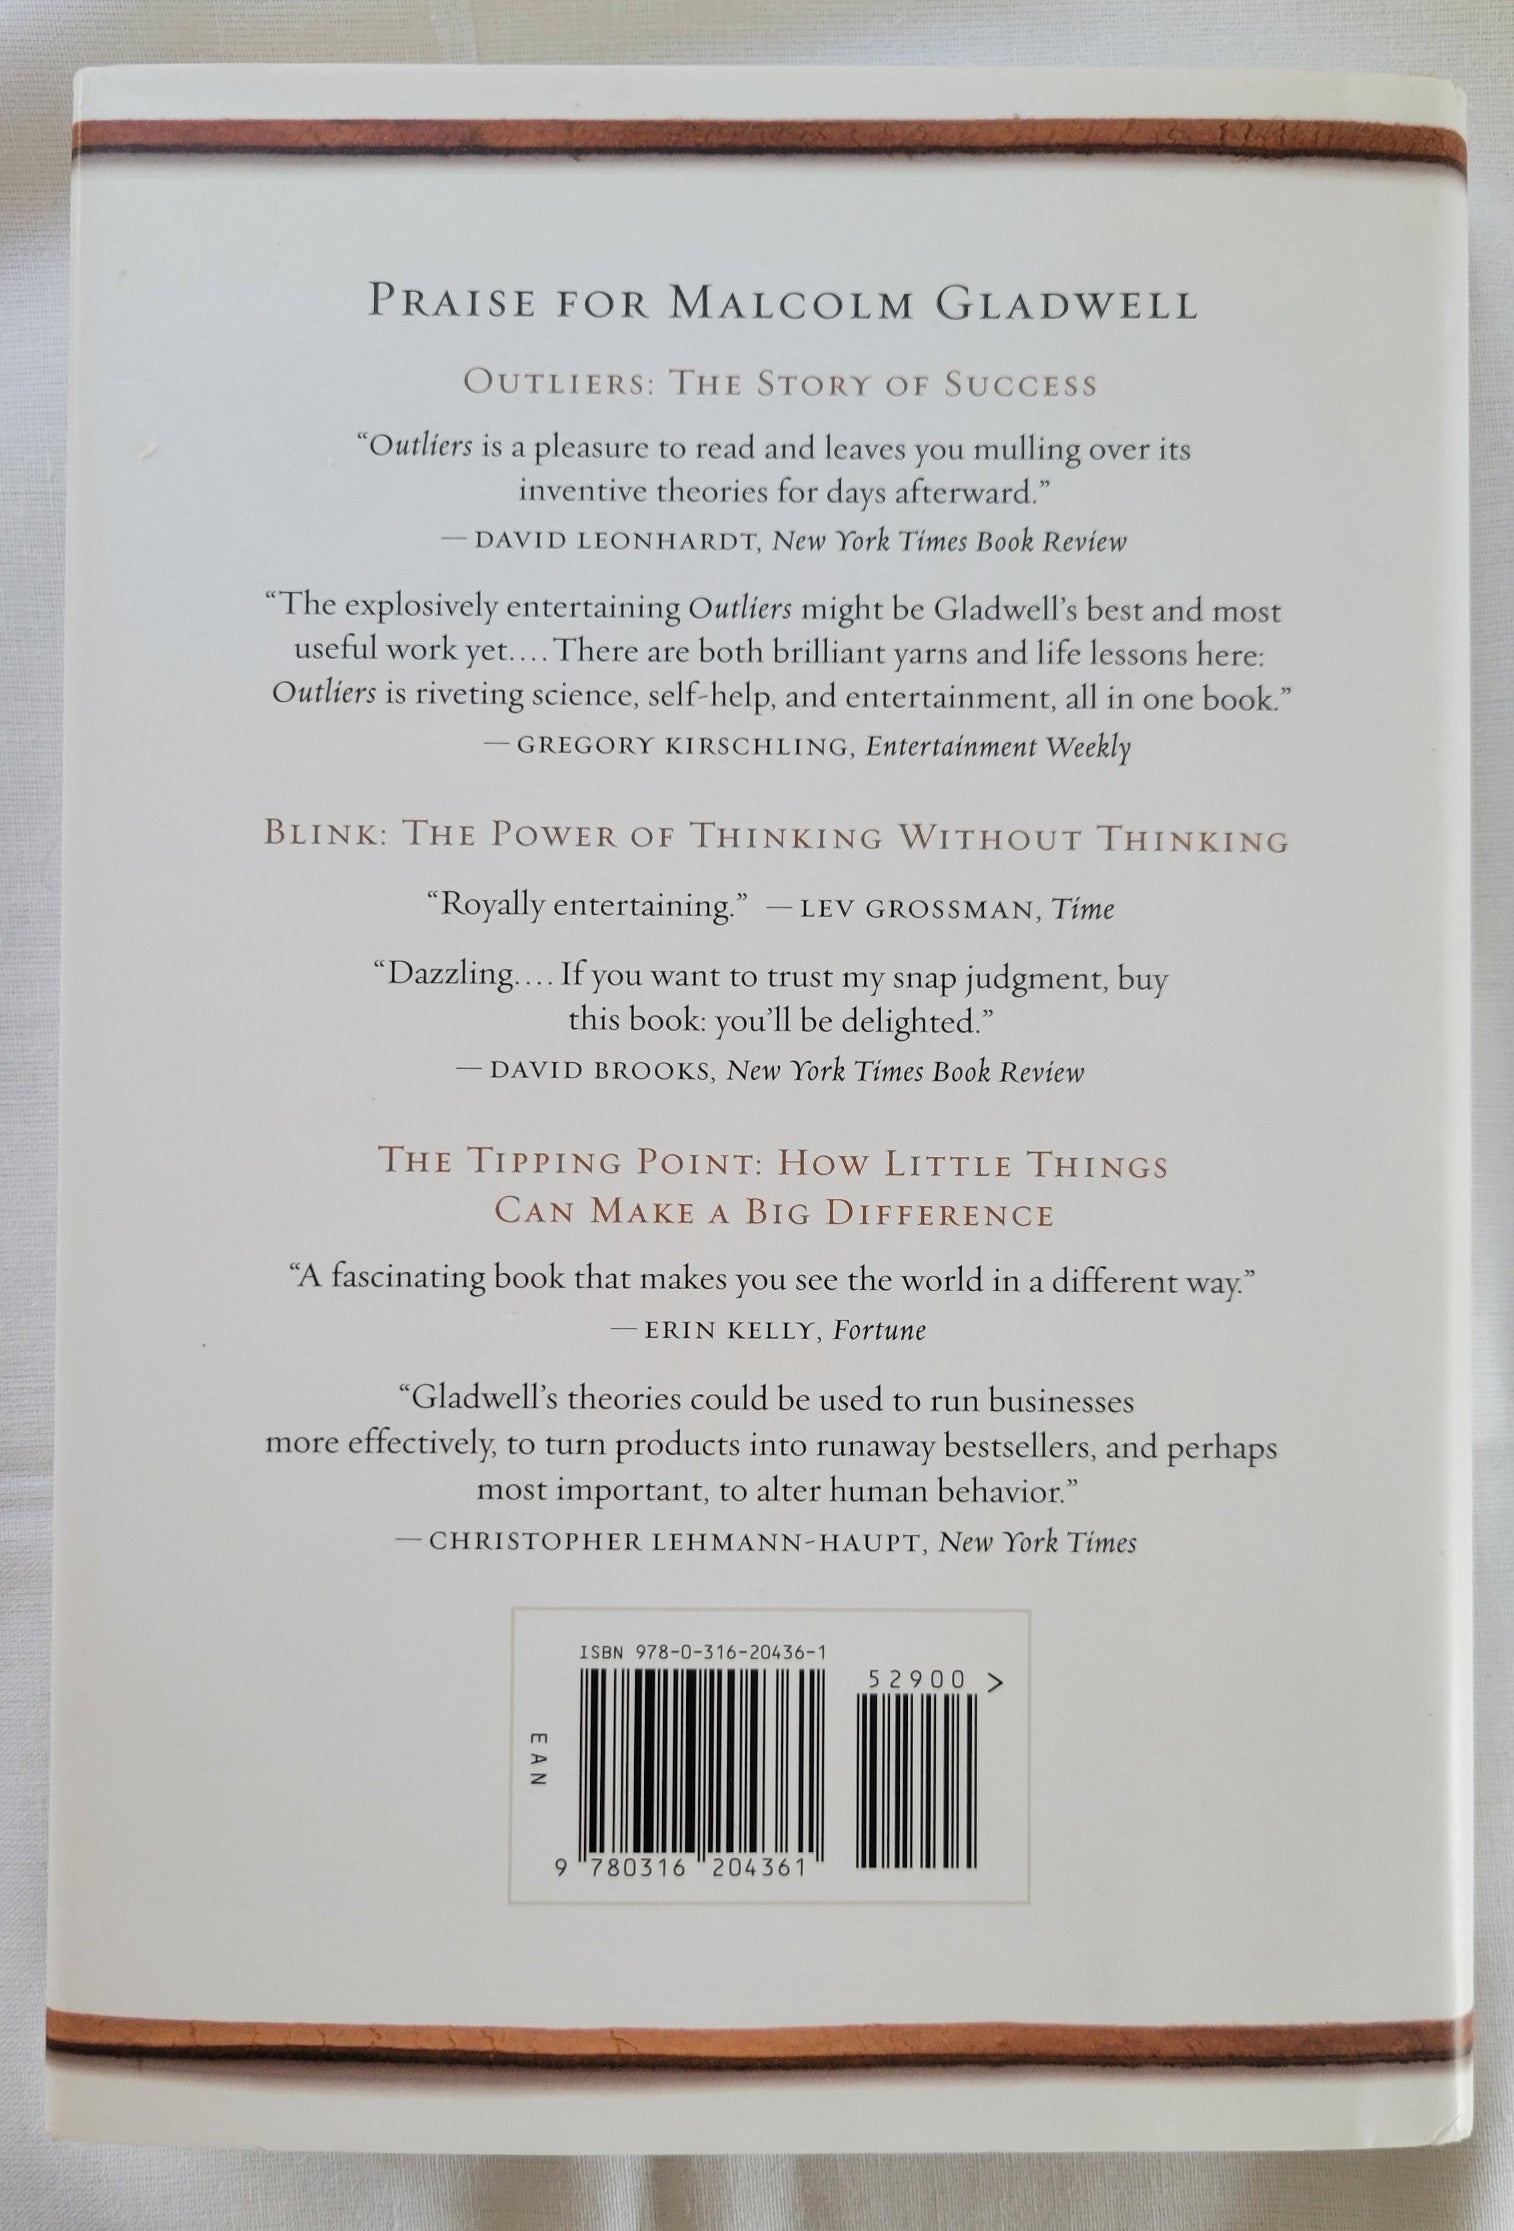 Used book David and Goliath: Underdogs, Misfits, and the Art of Battling Giants, written by Malcolm Gladwell.  View of back cover.